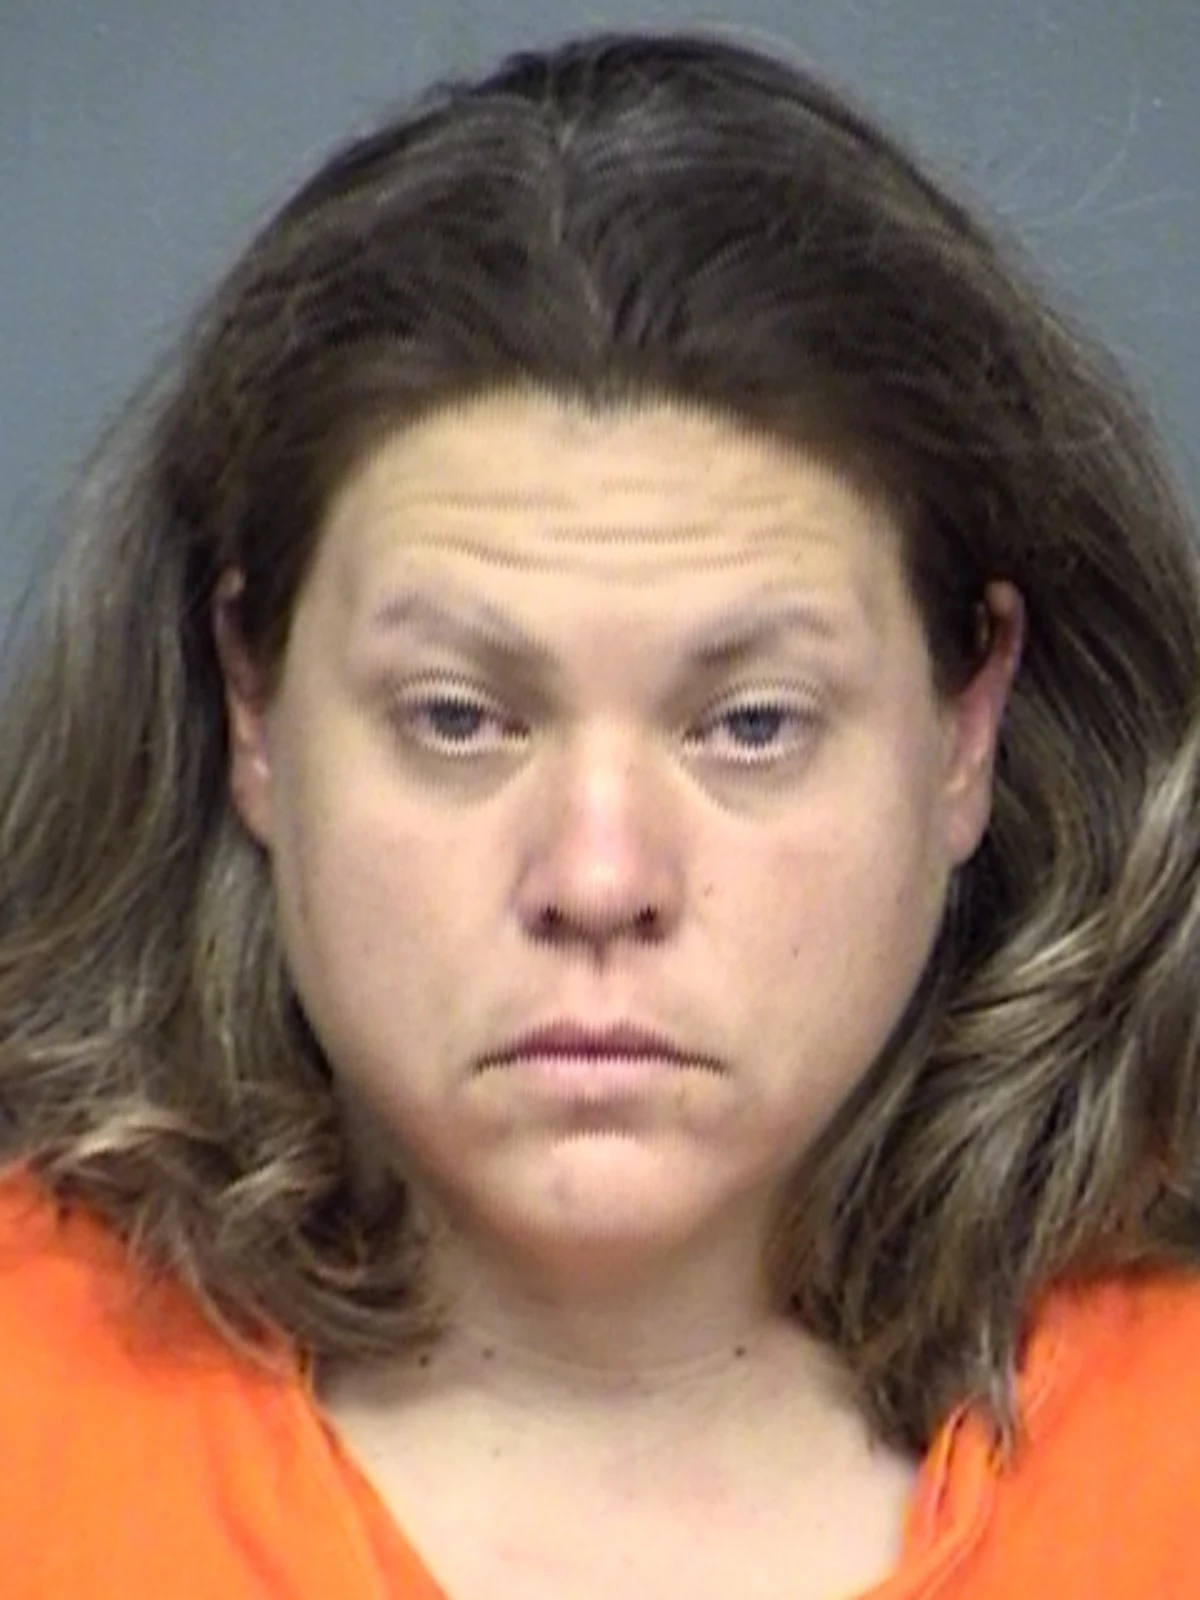 Texarkana Woman Arrested for Copper Theft